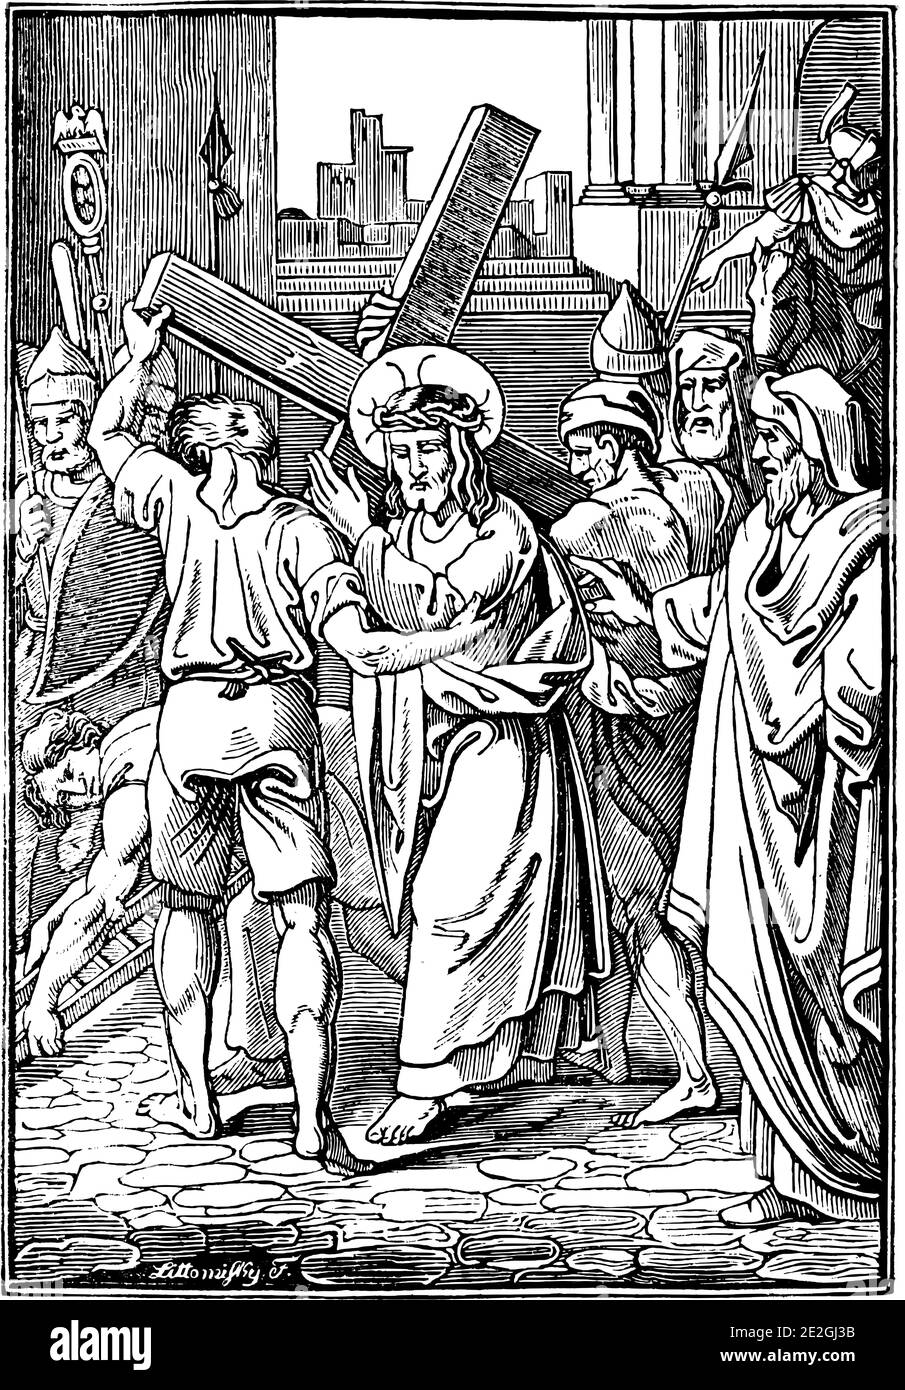 2nd or Second Station of the Cross or Way of the Cross or Via Crucis. Jesus carries His cross.Bible,New Testament. Antique vintage biblical religious engraving or drawing. Stock Vector